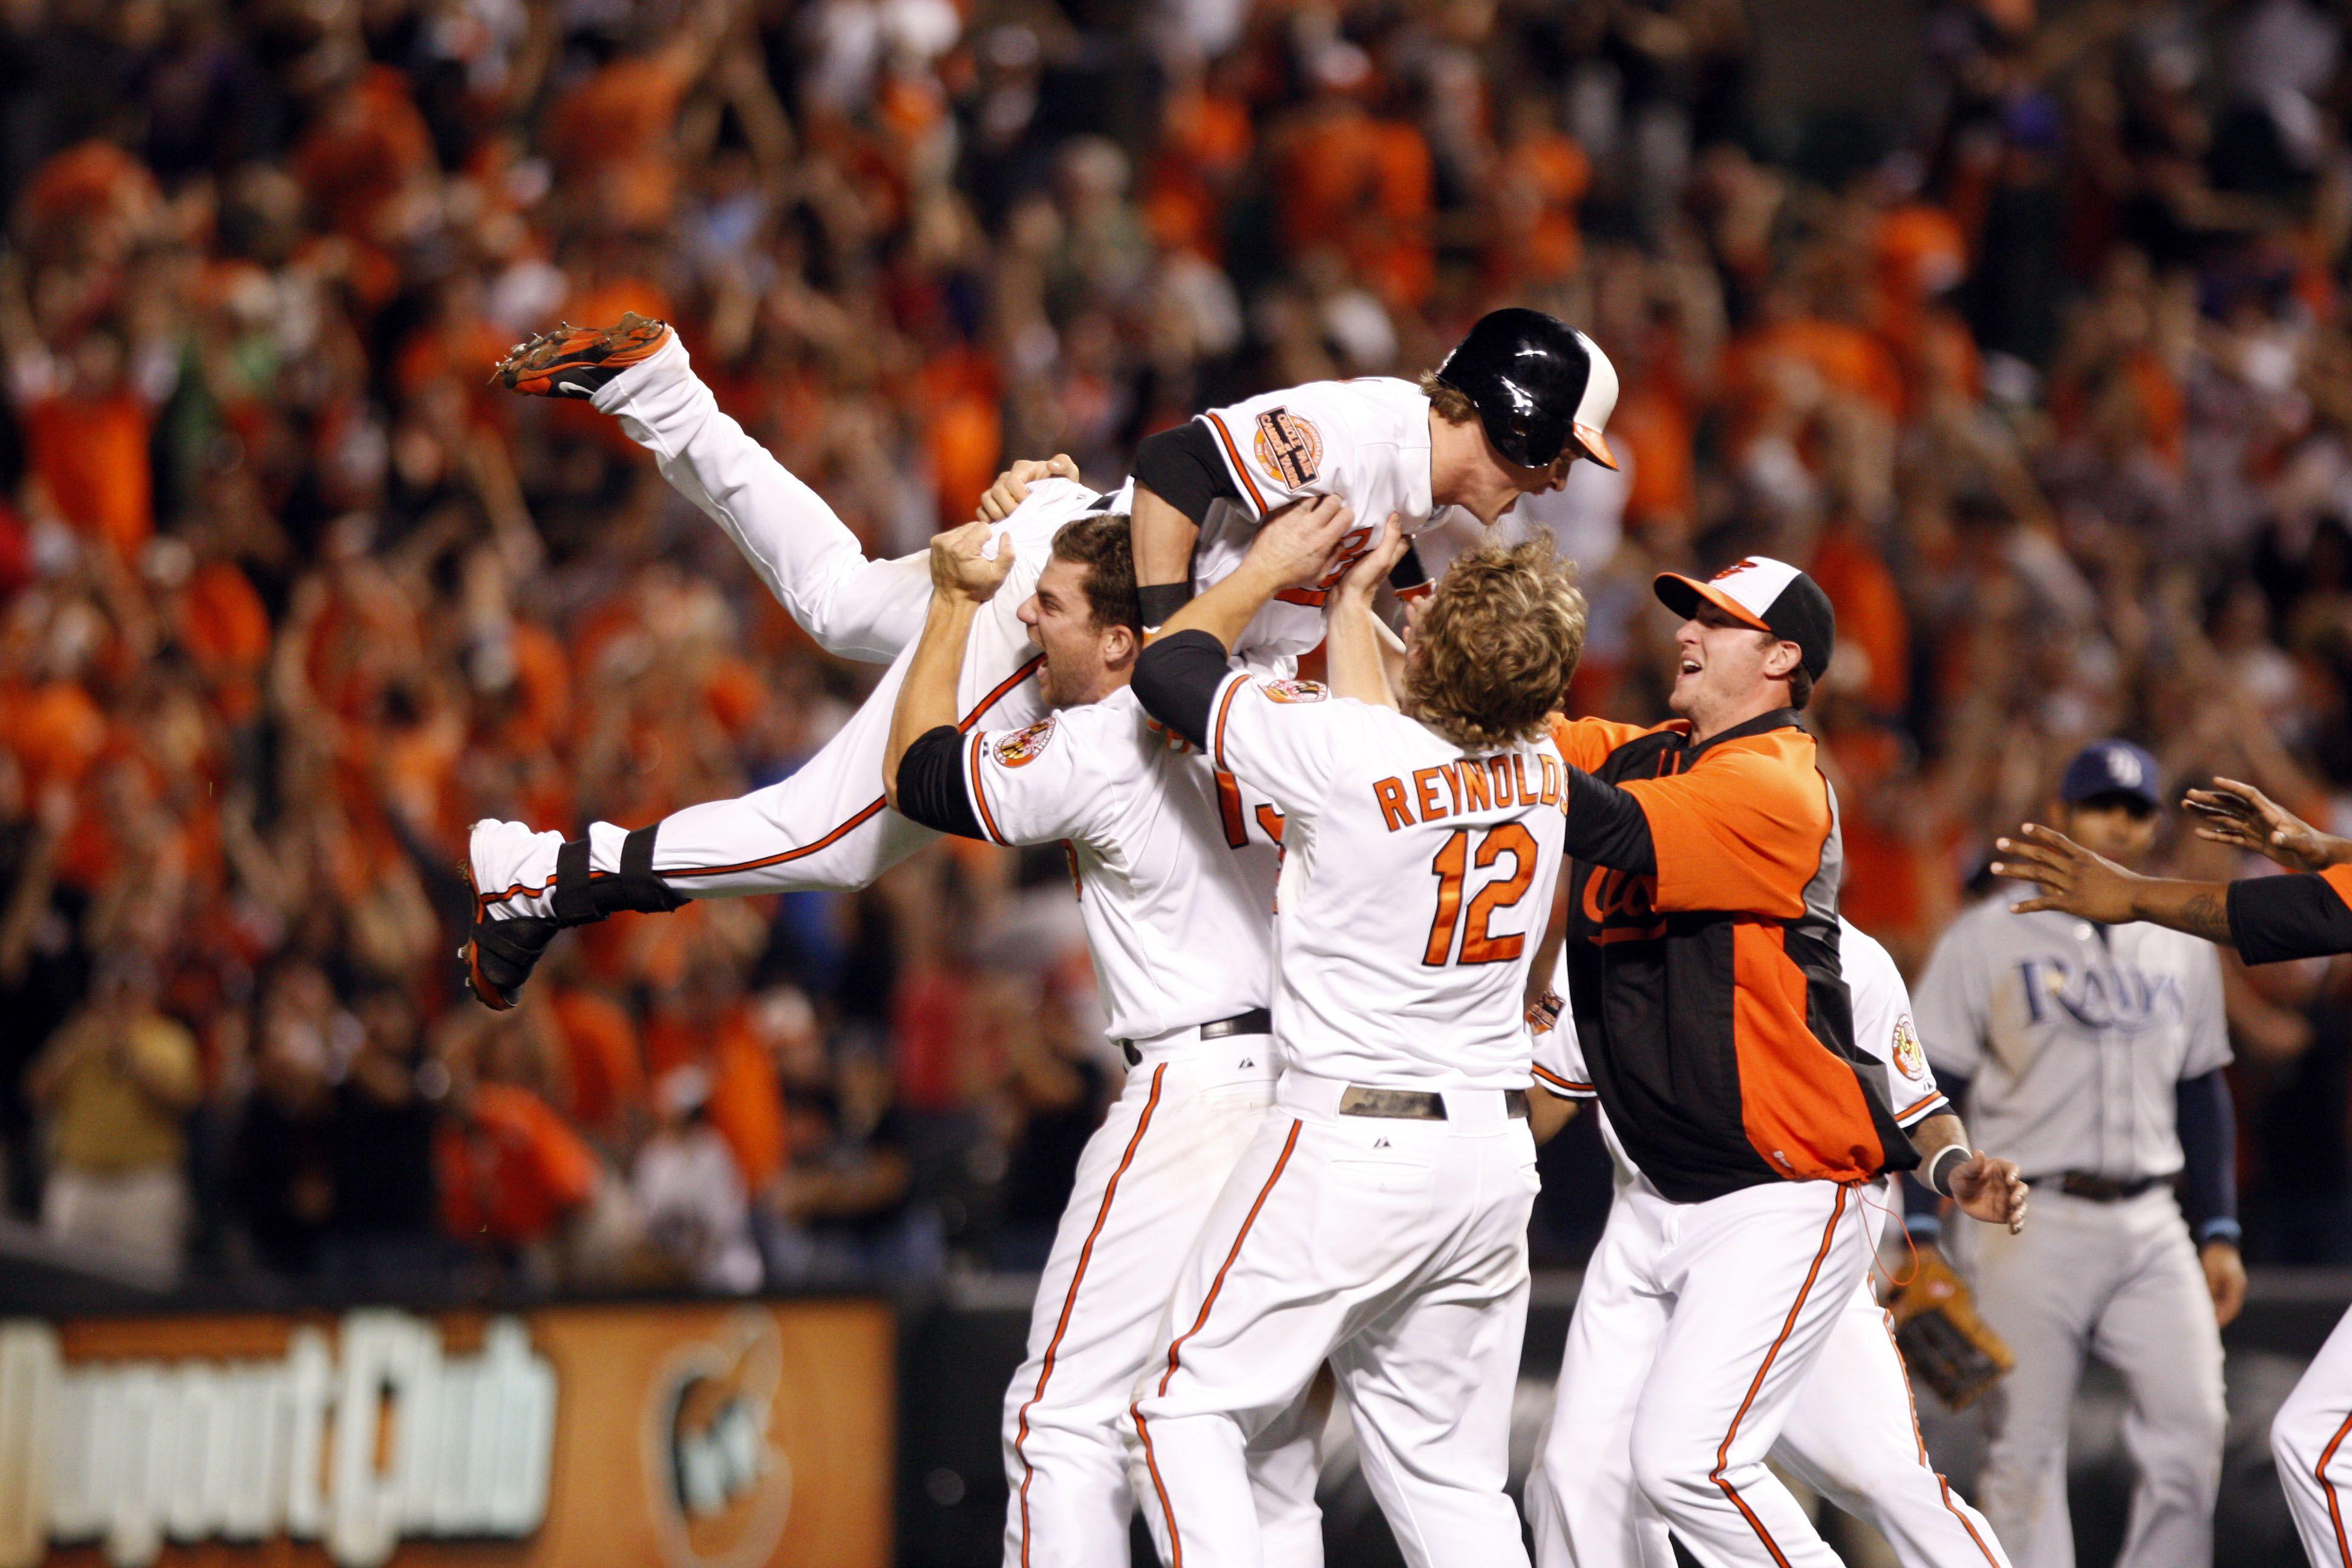 Baltimore Orioles Wallpaper, Browser Themes and More